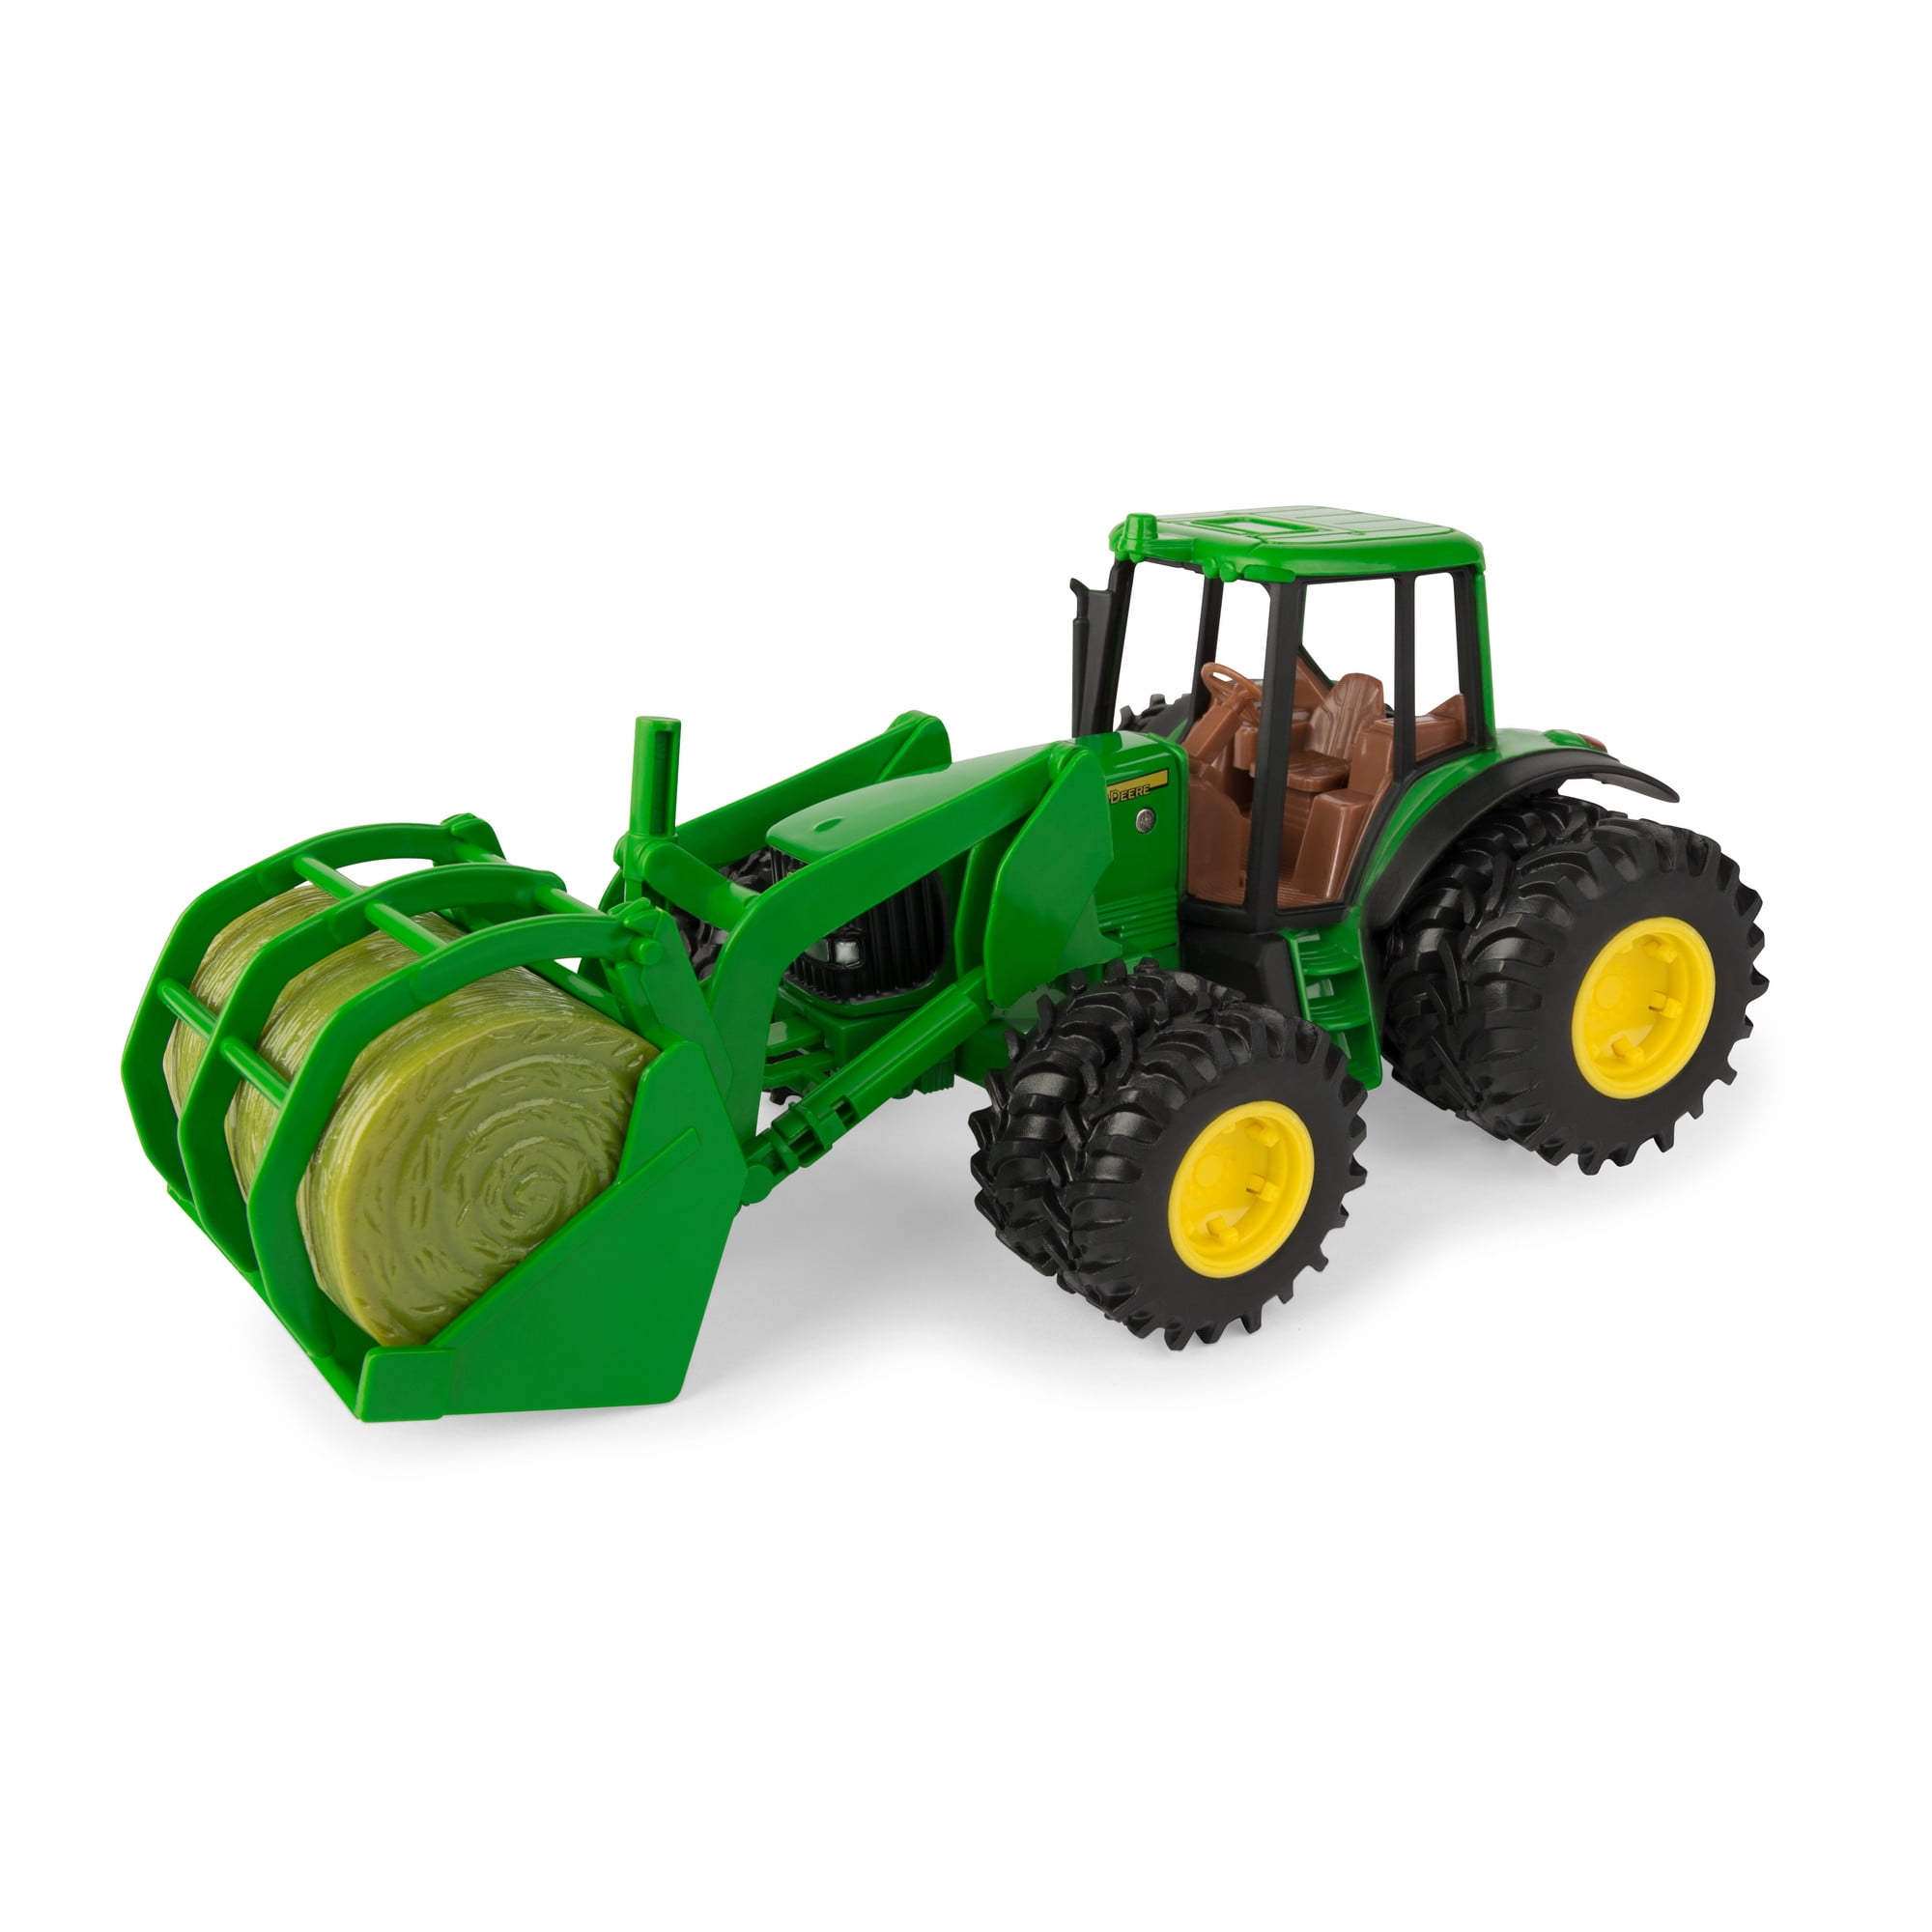 NEW JOHN DEERE MODEL 7220 FARM TRACTOR Moveable Duals Bale Mover New Box